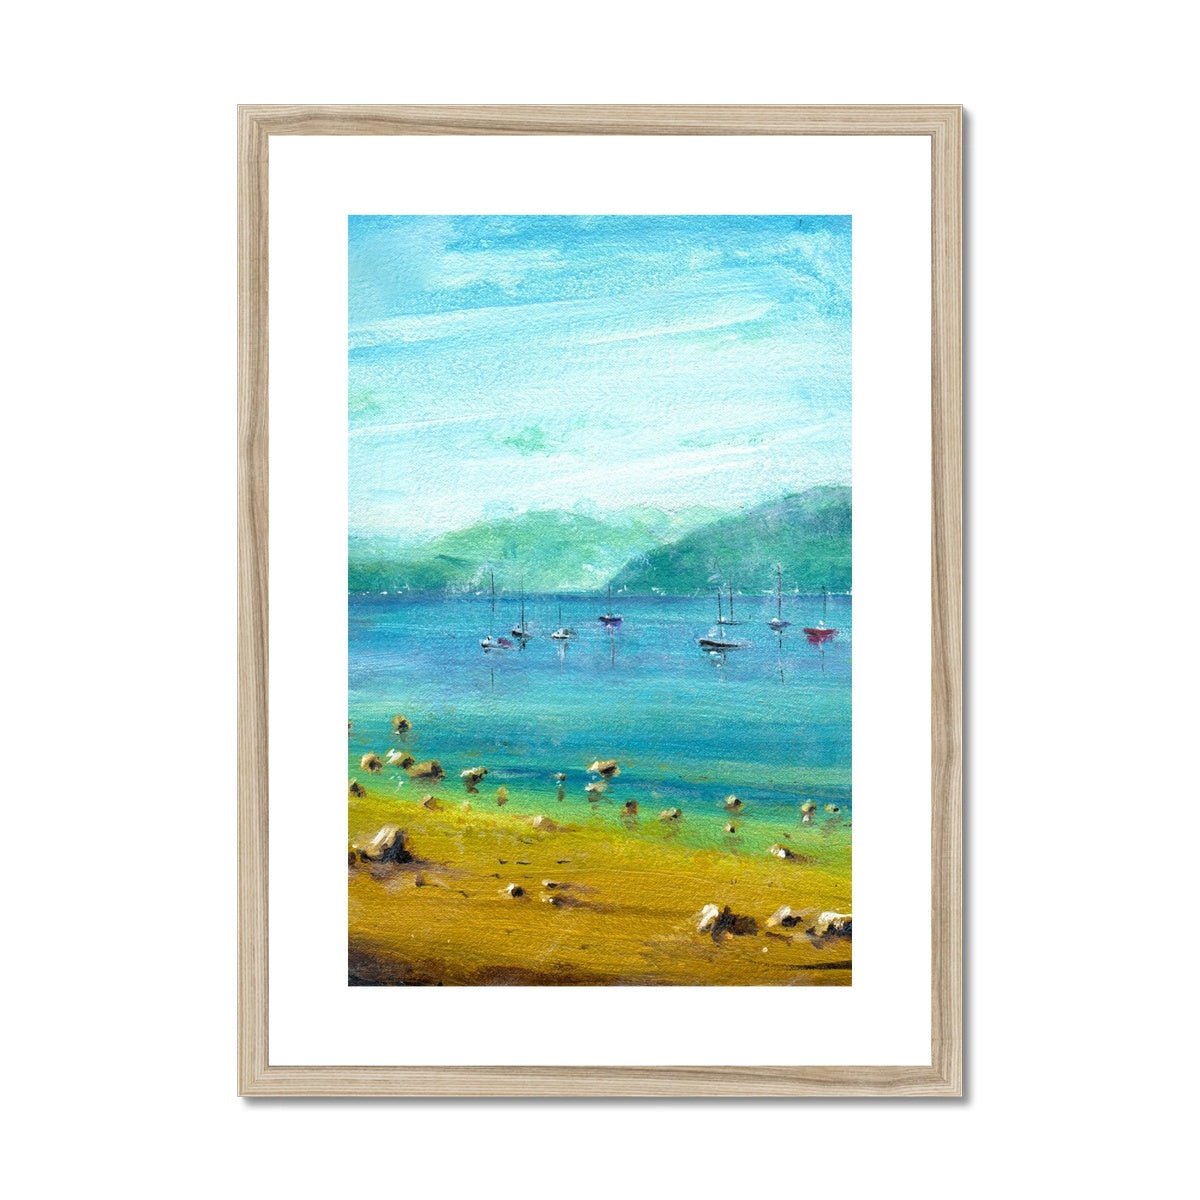 A Summer Day On The Clyde Painting | Framed & Mounted Prints From Scotland-Framed & Mounted Prints-River Clyde Art Gallery-A2 Portrait-Natural Frame-Paintings, Prints, Homeware, Art Gifts From Scotland By Scottish Artist Kevin Hunter